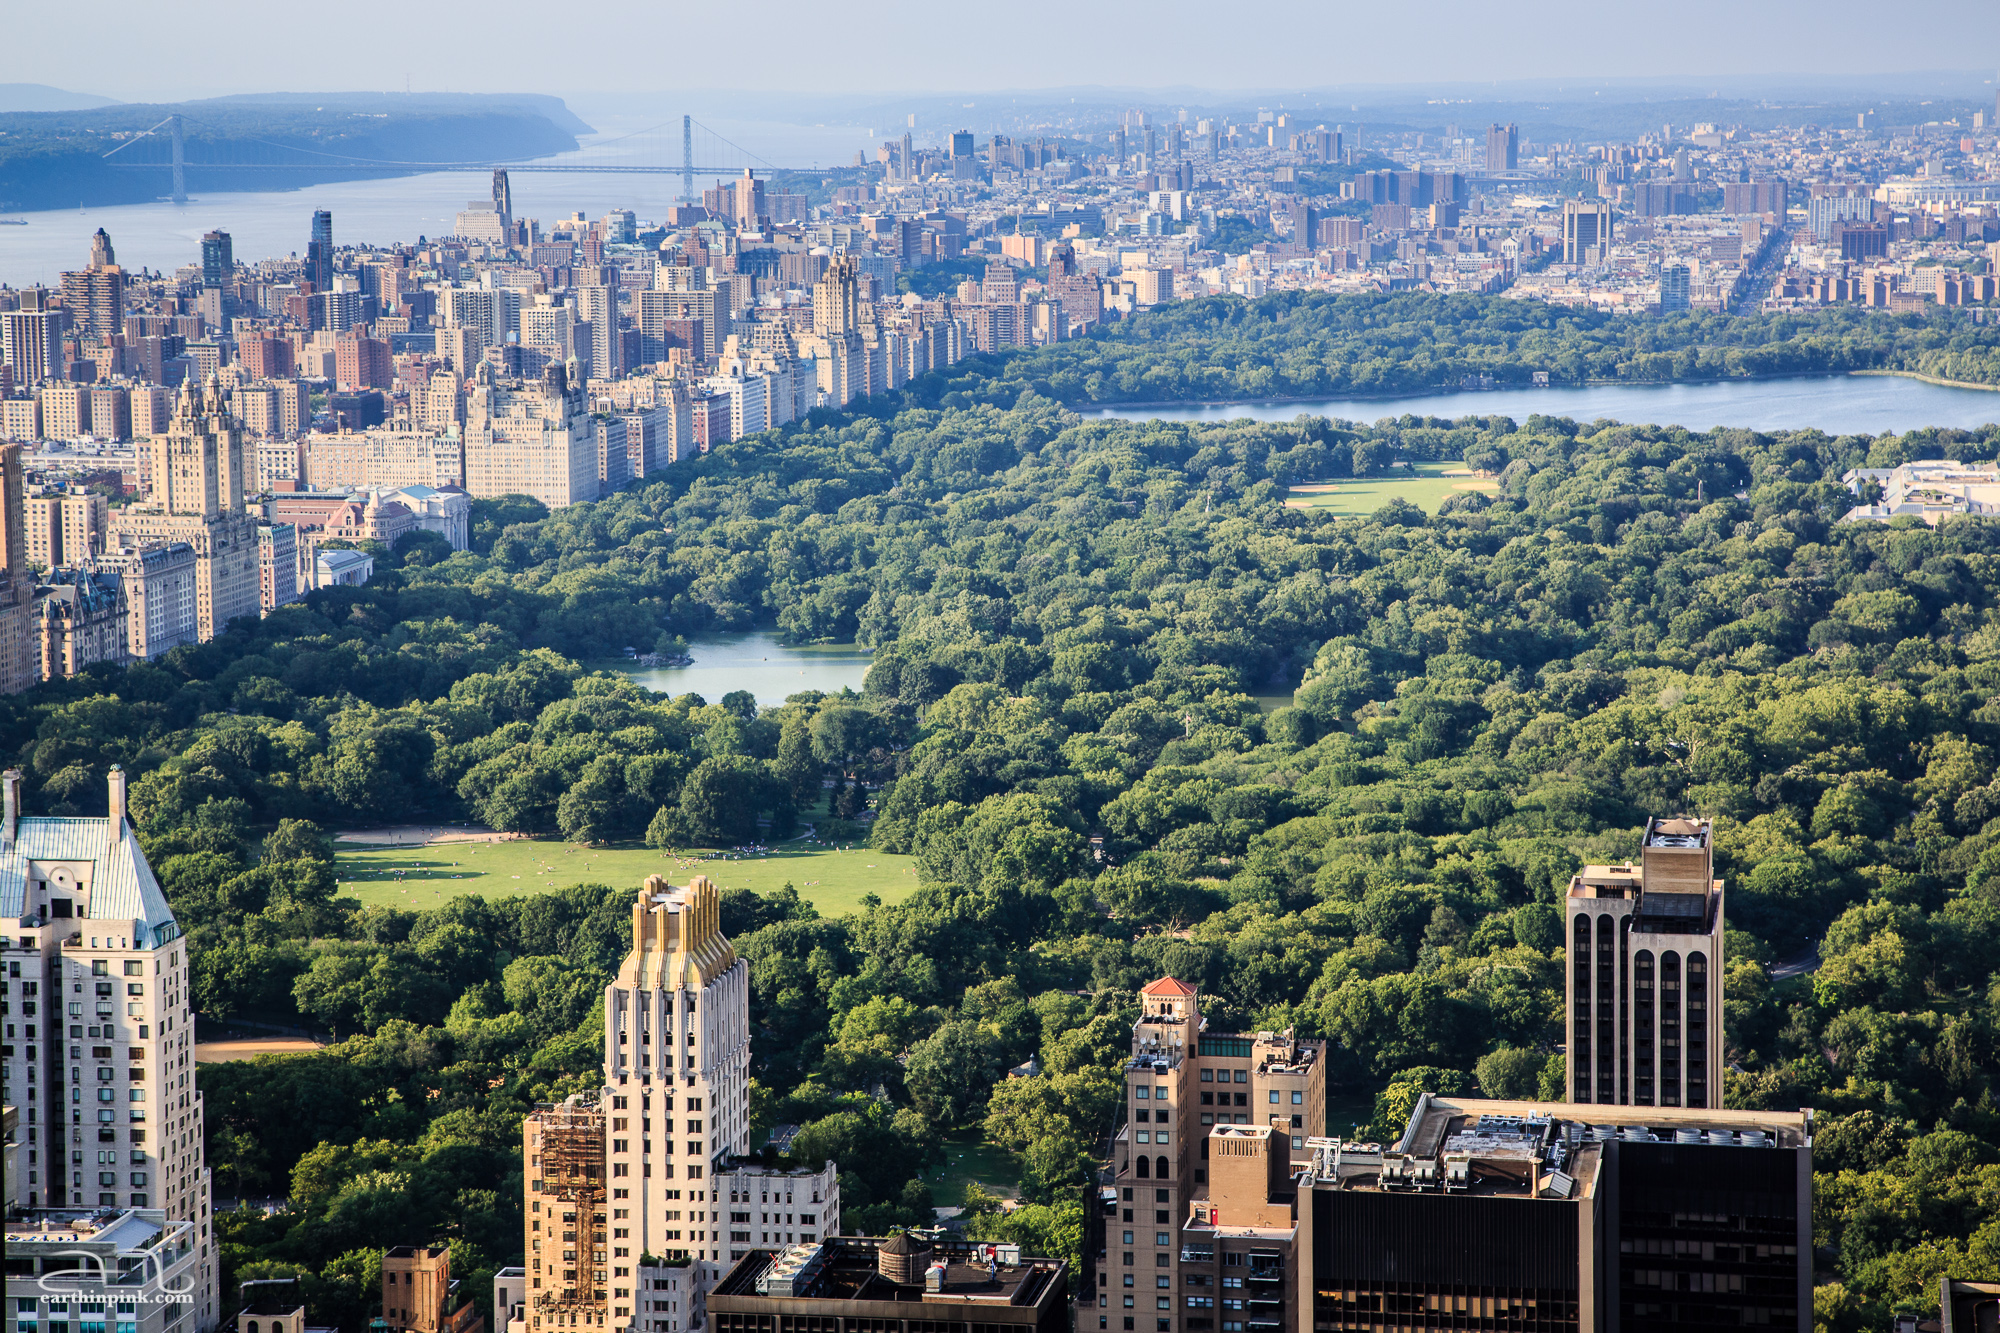 New York's Central Park viewed from Top of the Rock.